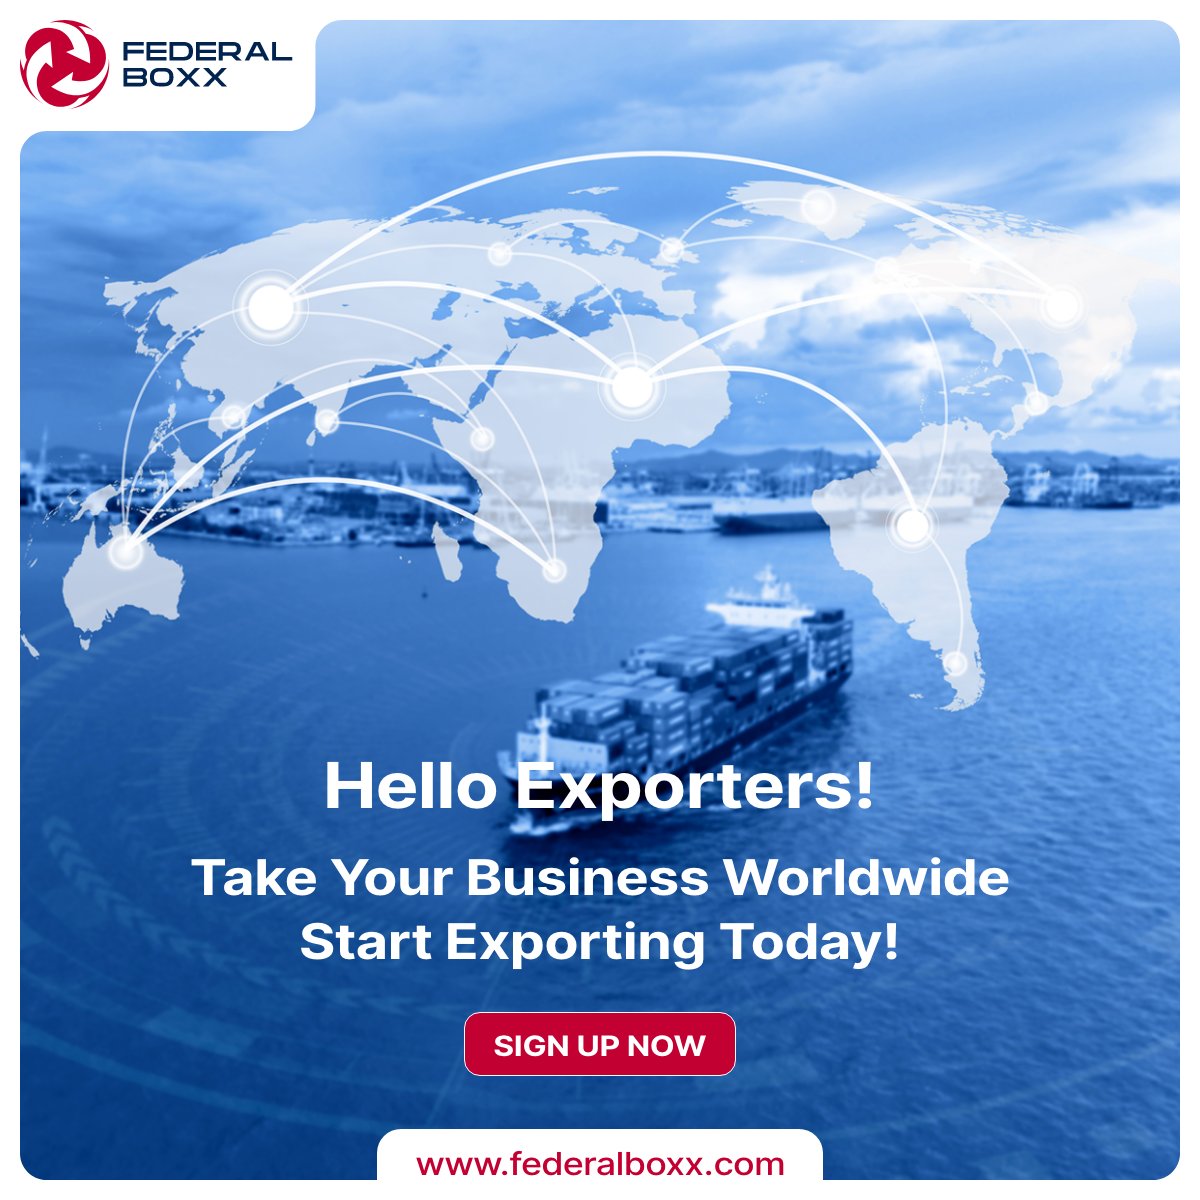 Hey Exporters!  Ready to take your business to new heights? Start exporting worldwide with FederalBoxx! Sign up now and unlock global opportunities. #Exporters #GlobalMarket #BusinessExpansion #Exporting #InternationalTrade